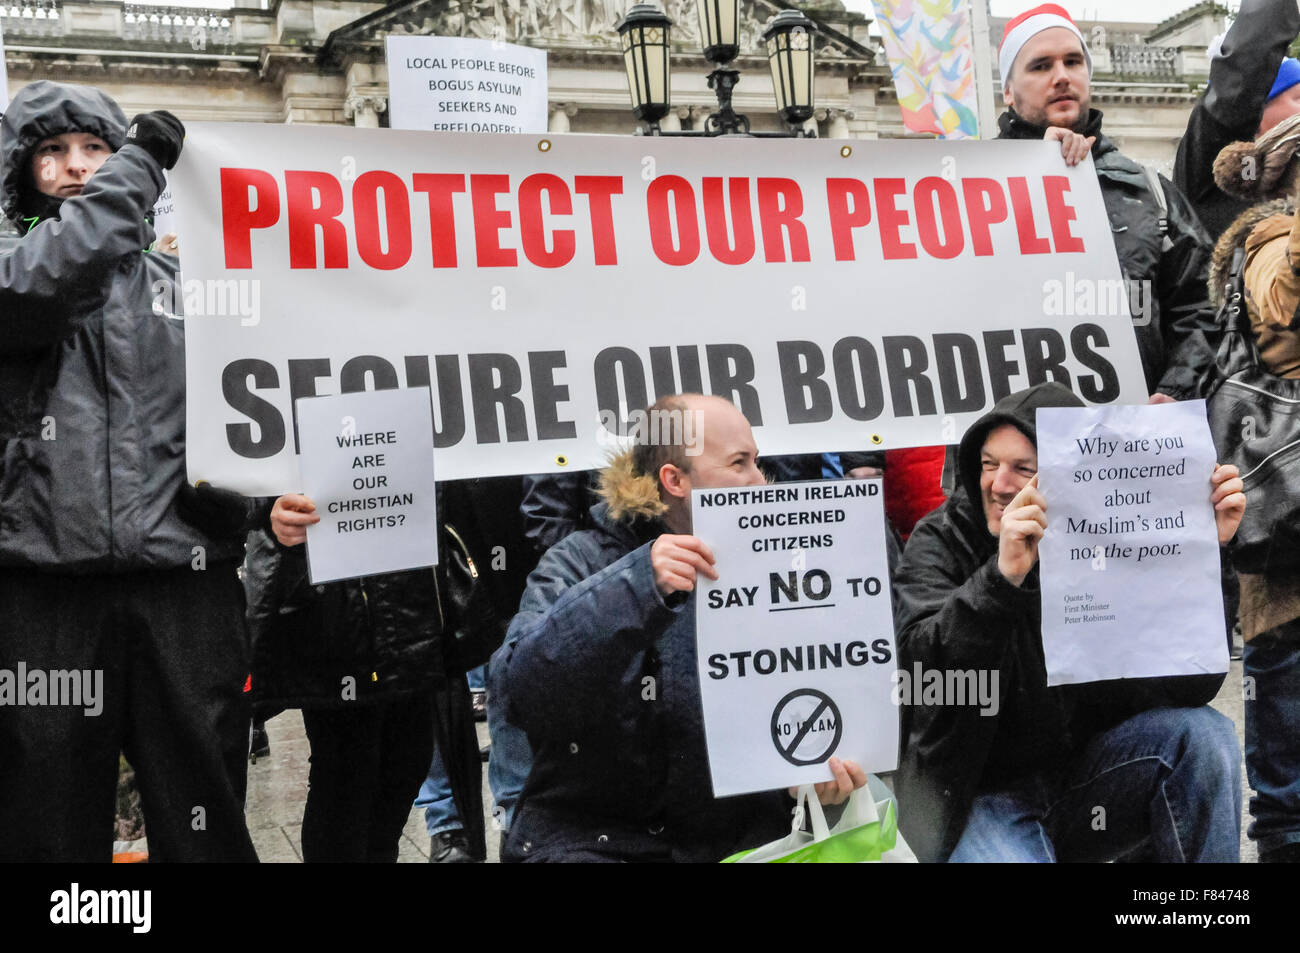 Belfast, Northern Ireland. 05 Dec 2015 - People hold up anti-refugee posters, including the message 'Protect our people. Secure our borders' and 'Say no to stonings' as the Protestant Coalition hold a protest against Islamic refugees coming to Northern Ireland. Credit:  Stephen Barnes/Alamy Live News Stock Photo